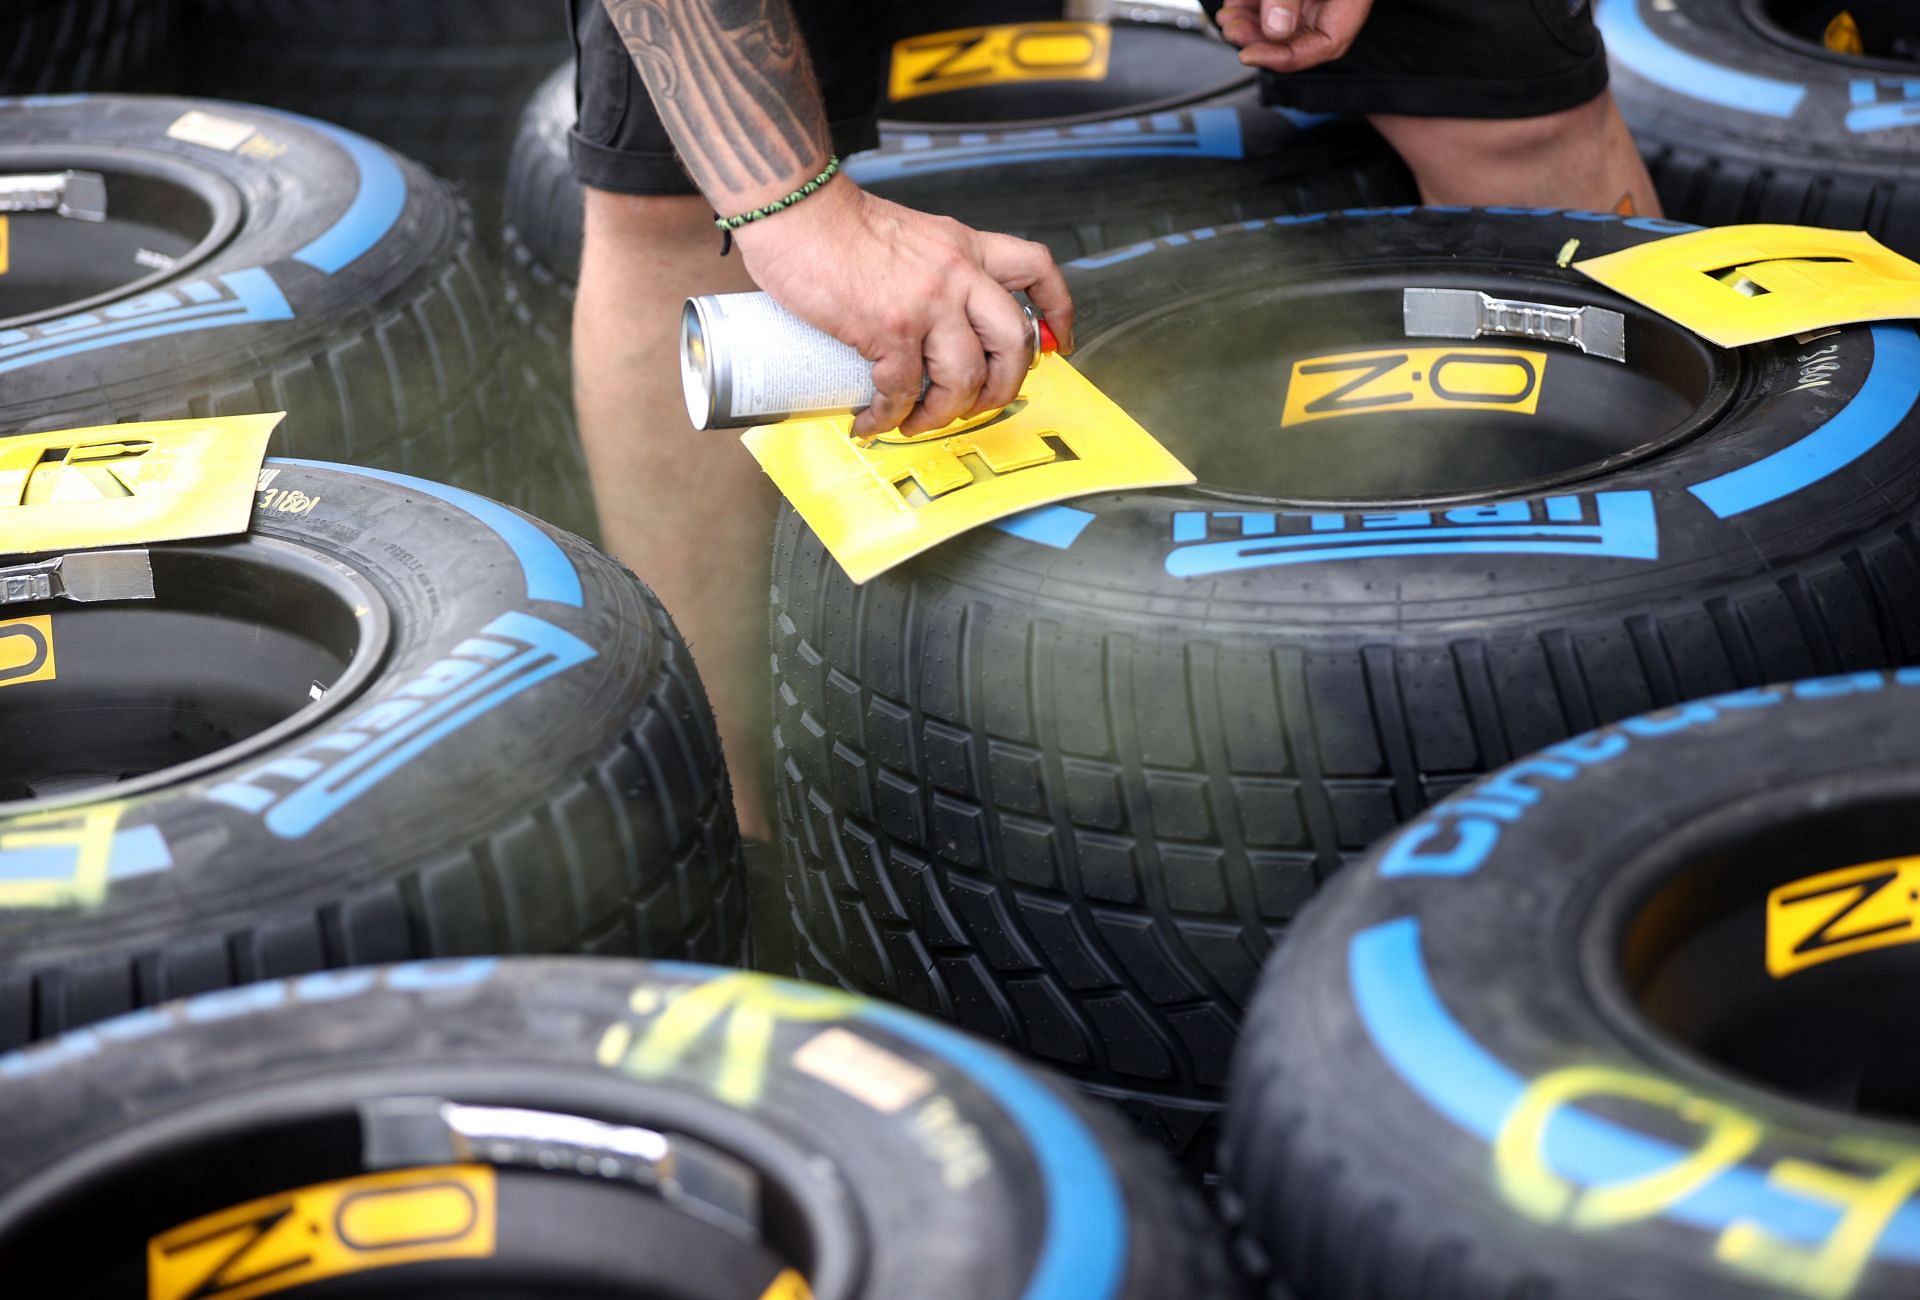 Teams work on tires ahead of the 2021 USGP in Austin, Texas. (Photo by Chris Graythen/Getty Images)